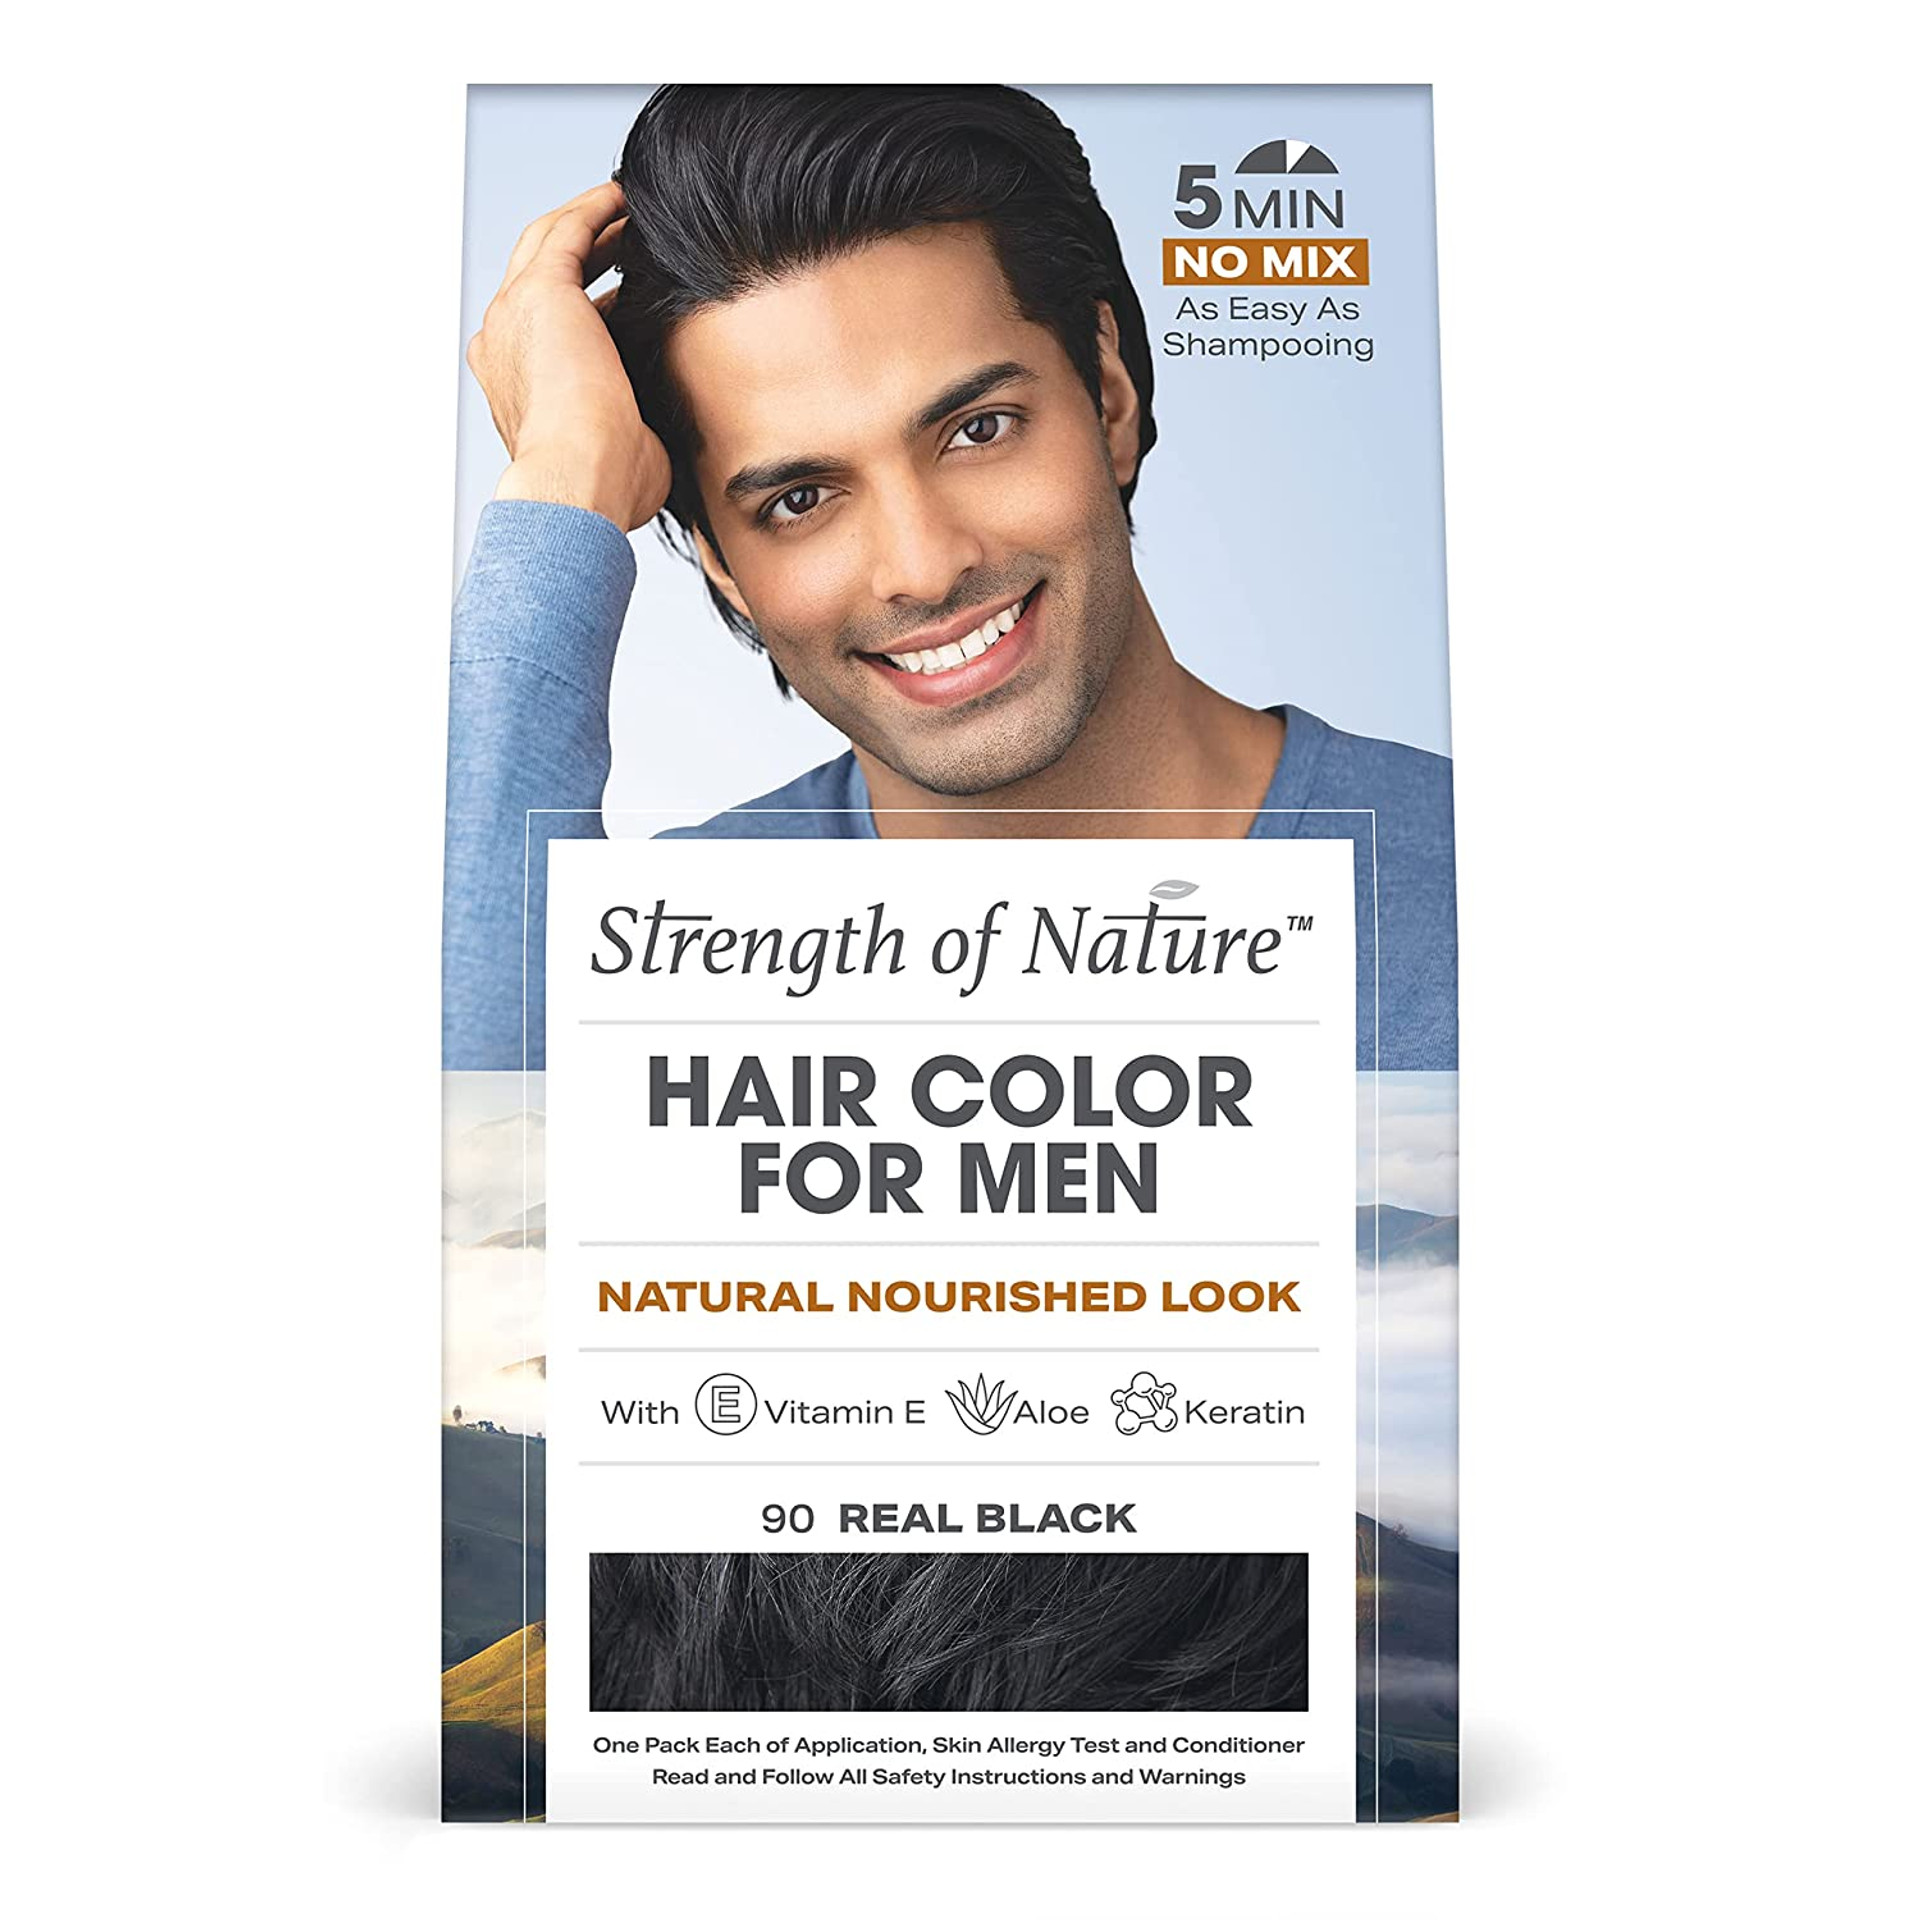 Hair Color For Men Products - Promo International - B2B